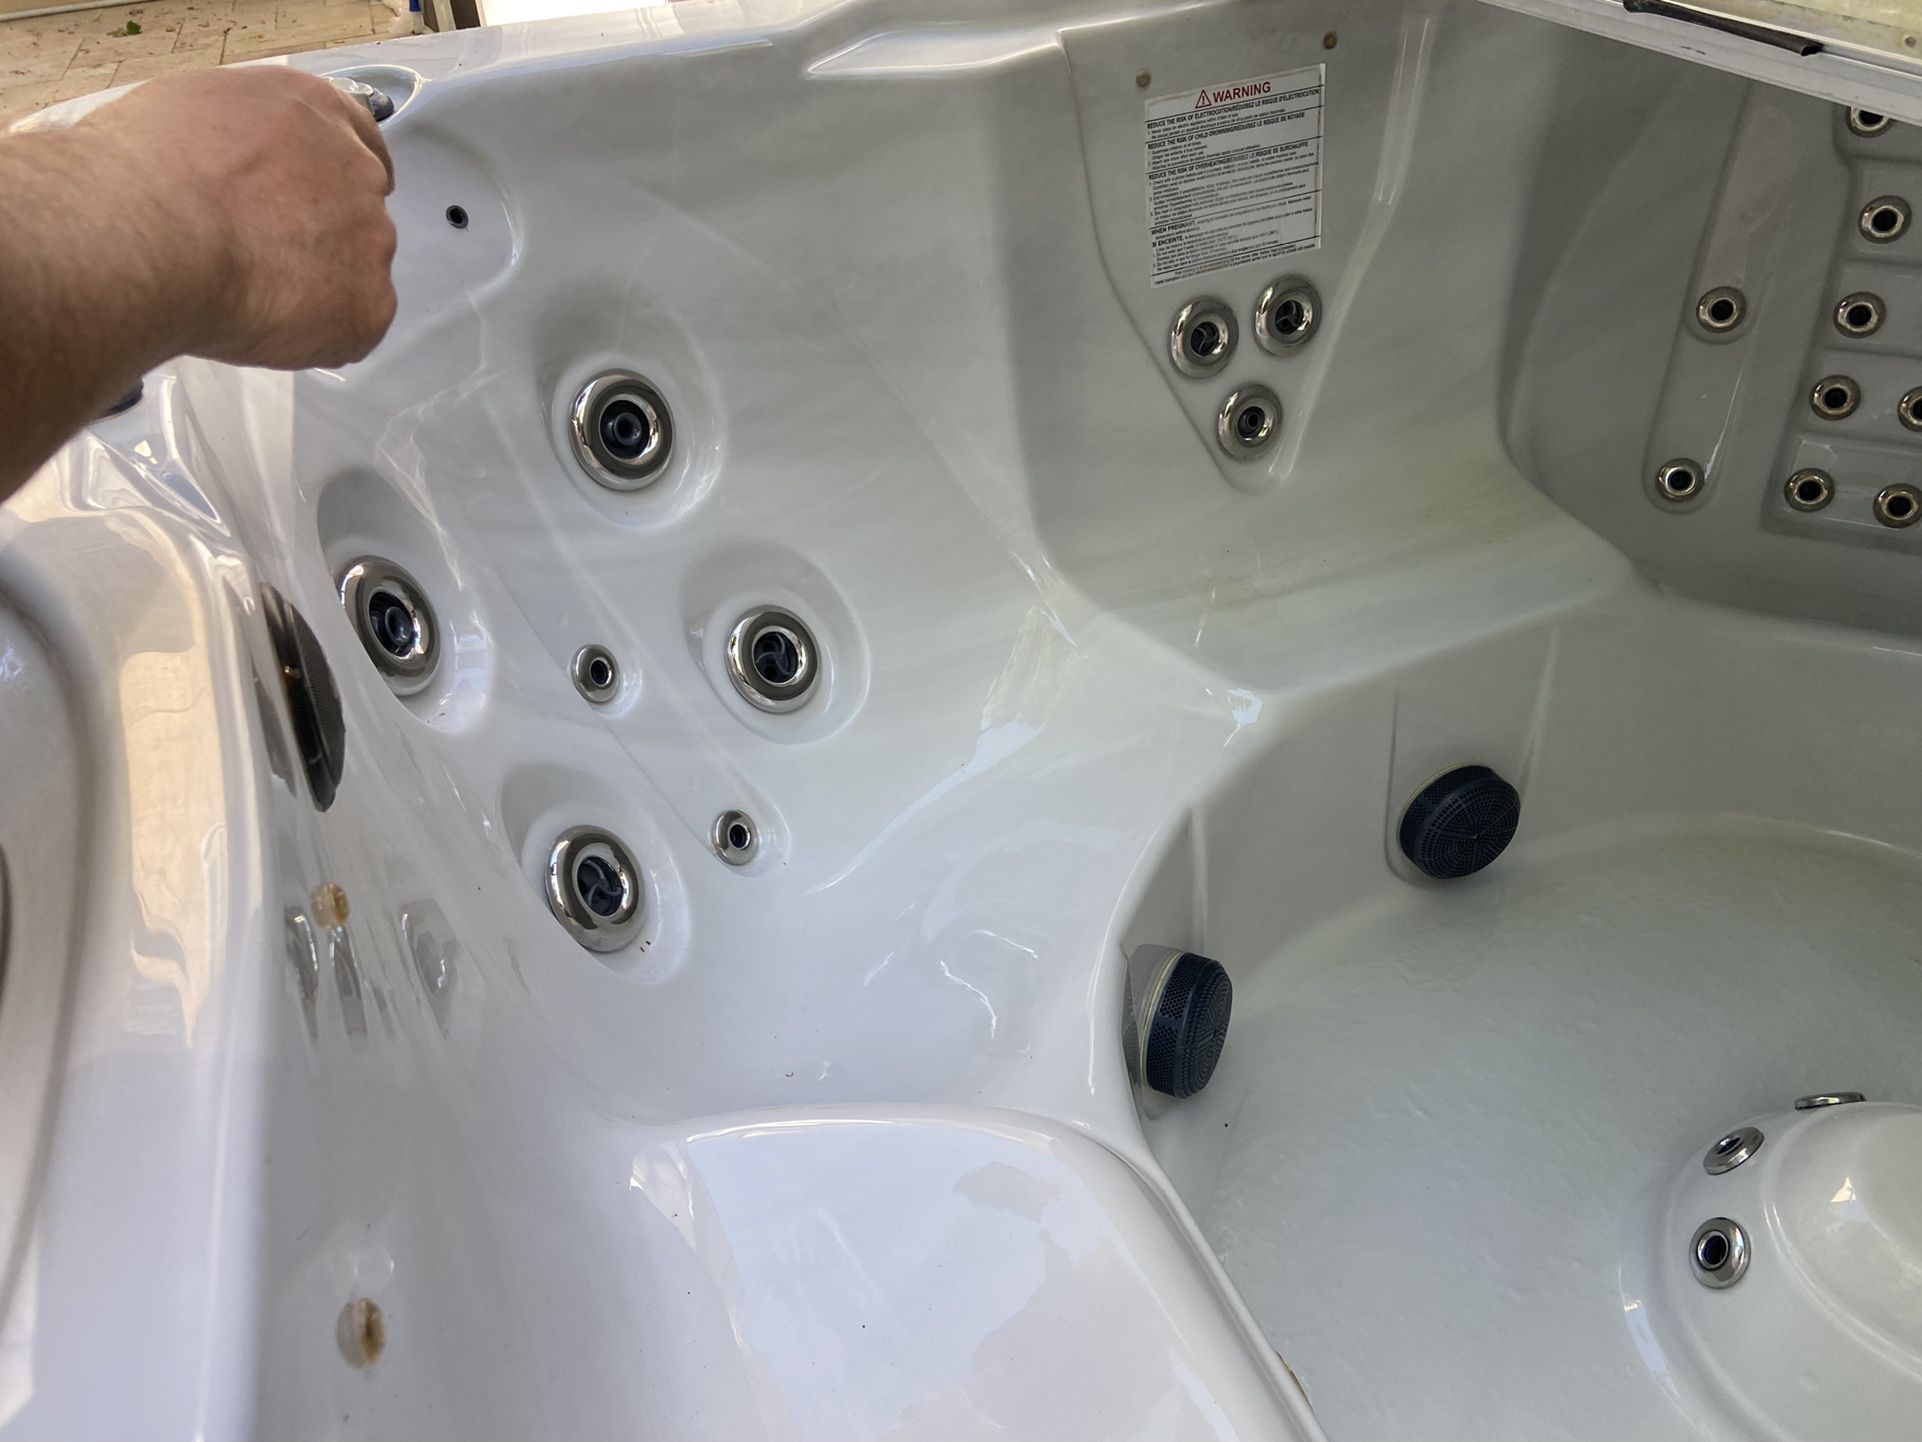 Hot Tub in fully working order,needs new framing,seats 6